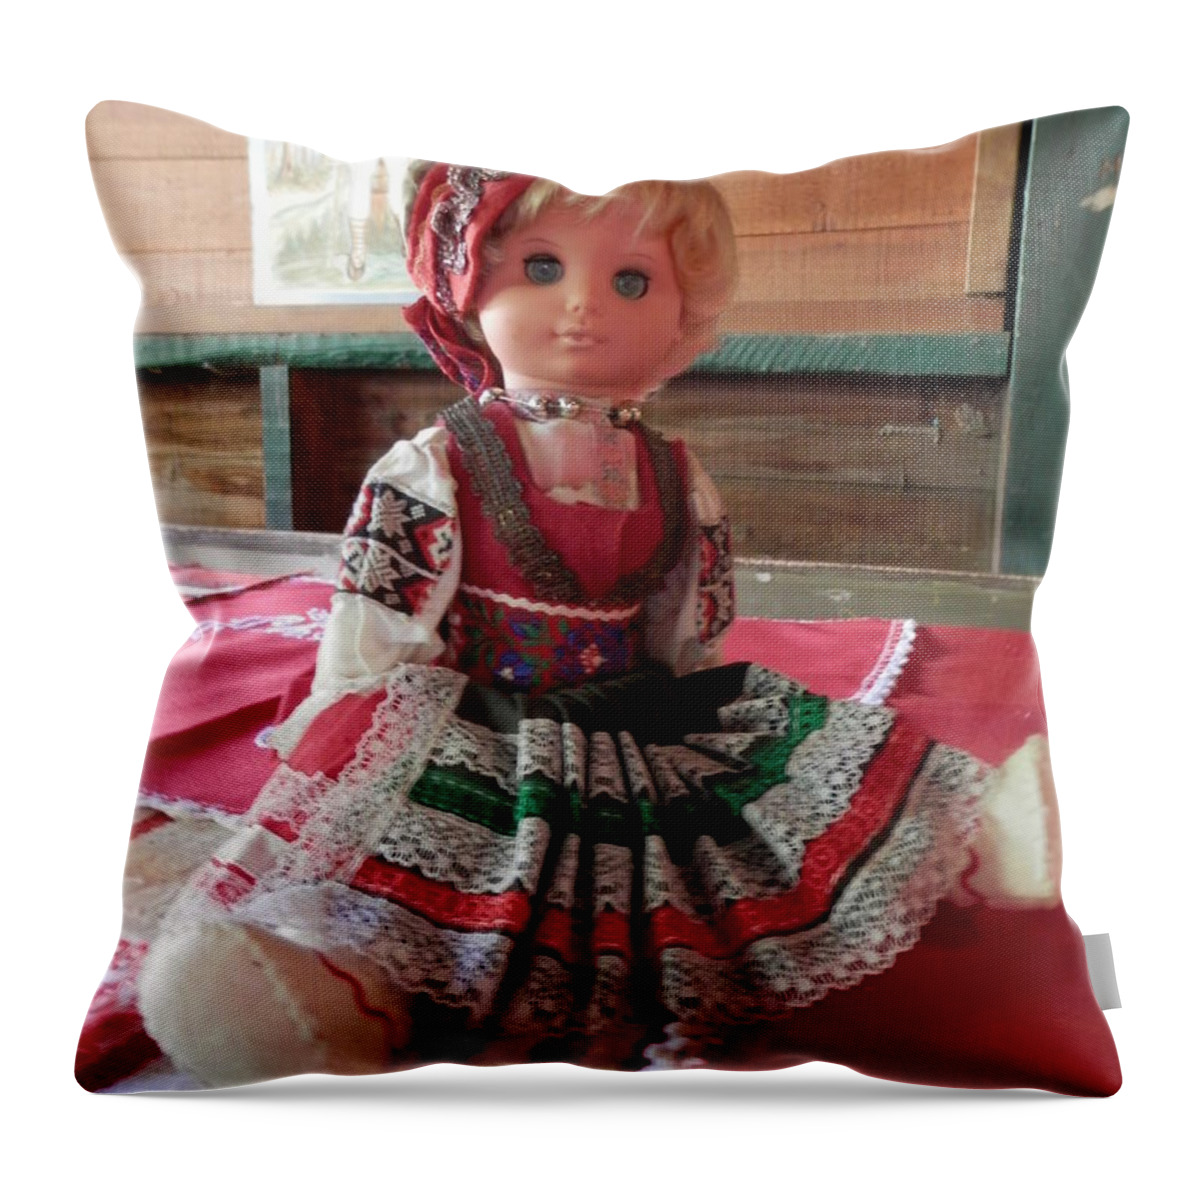 Doll Throw Pillow featuring the photograph Doll 2 by Pema Hou